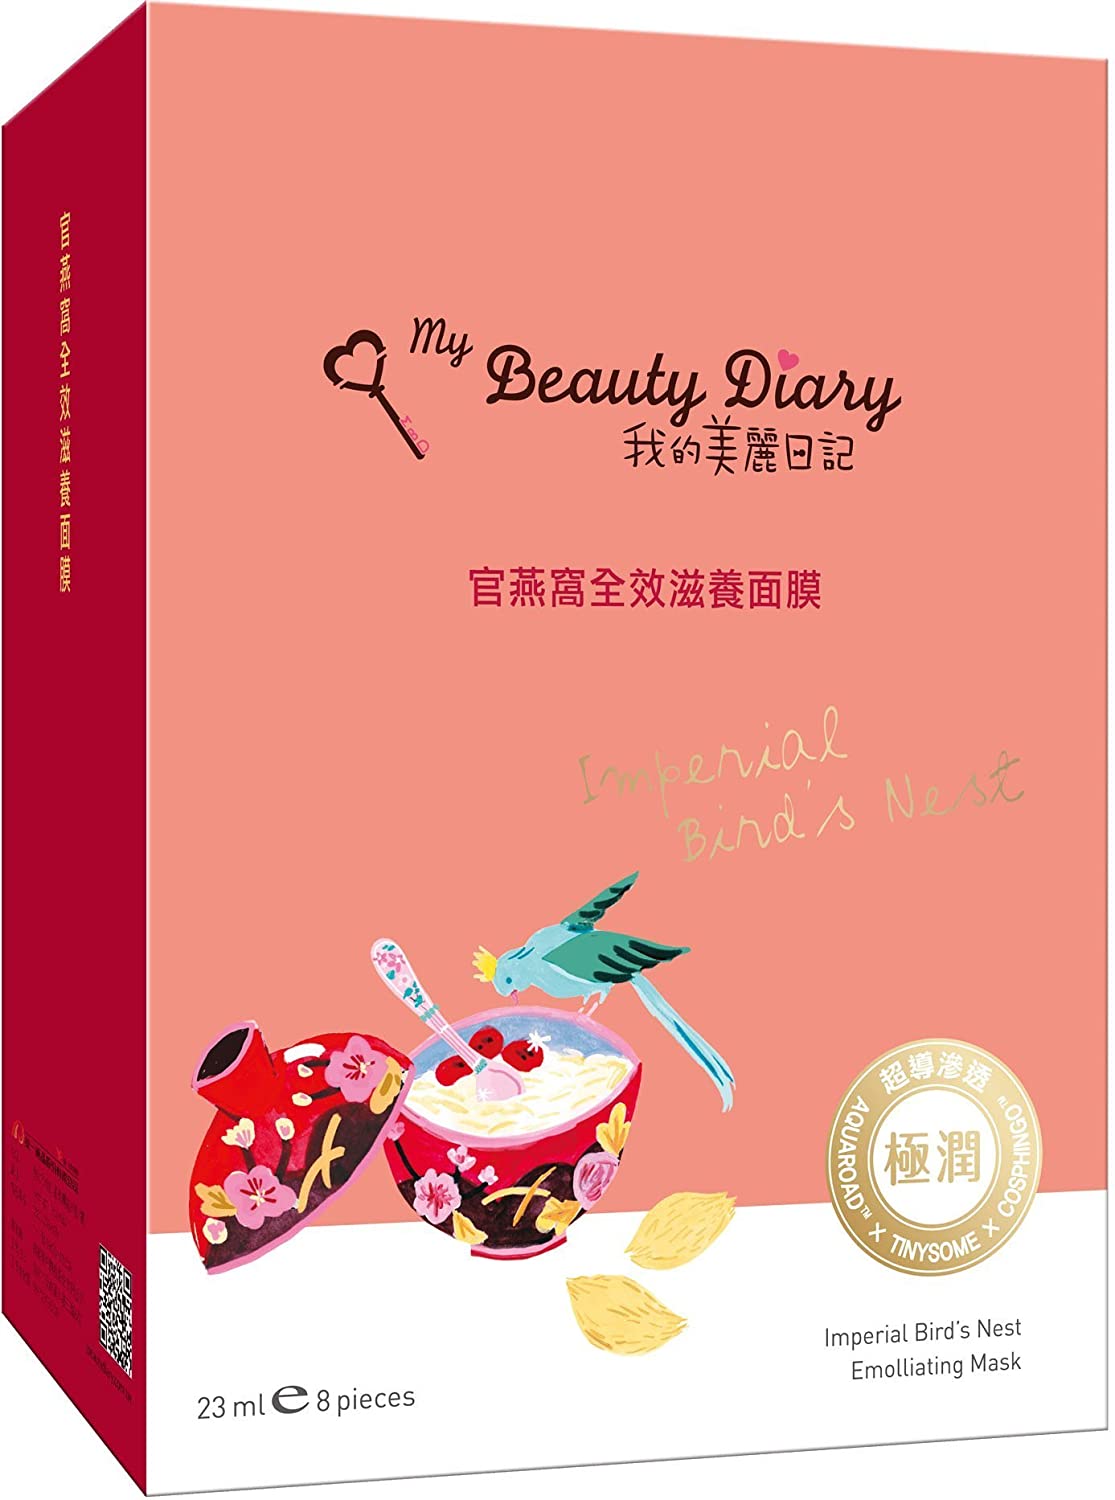 My Beauty Diary Imperial Bird's Nest Emolliating Mask